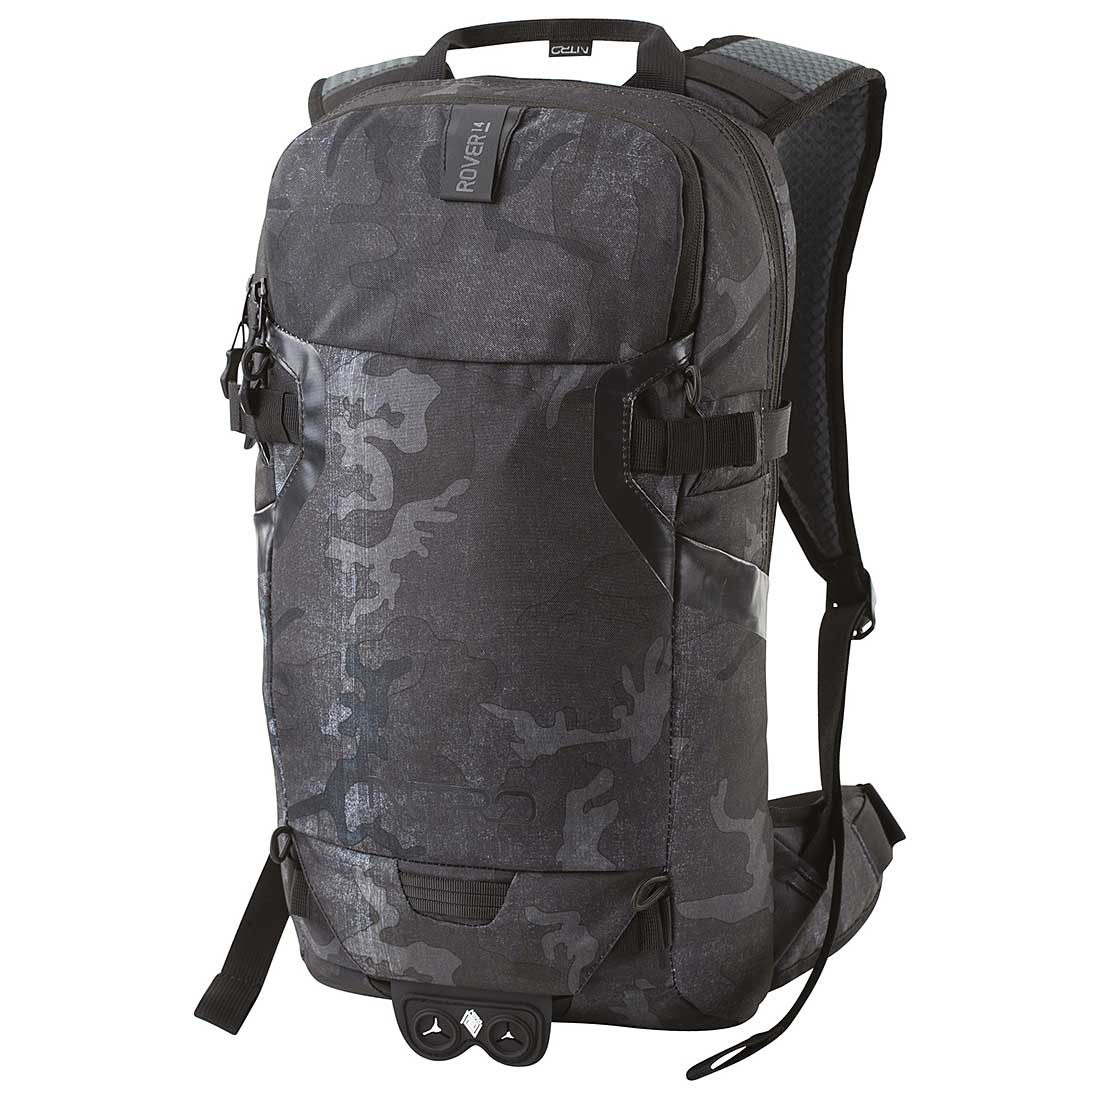 Rover Nitro Camo 14 Forged Backpack